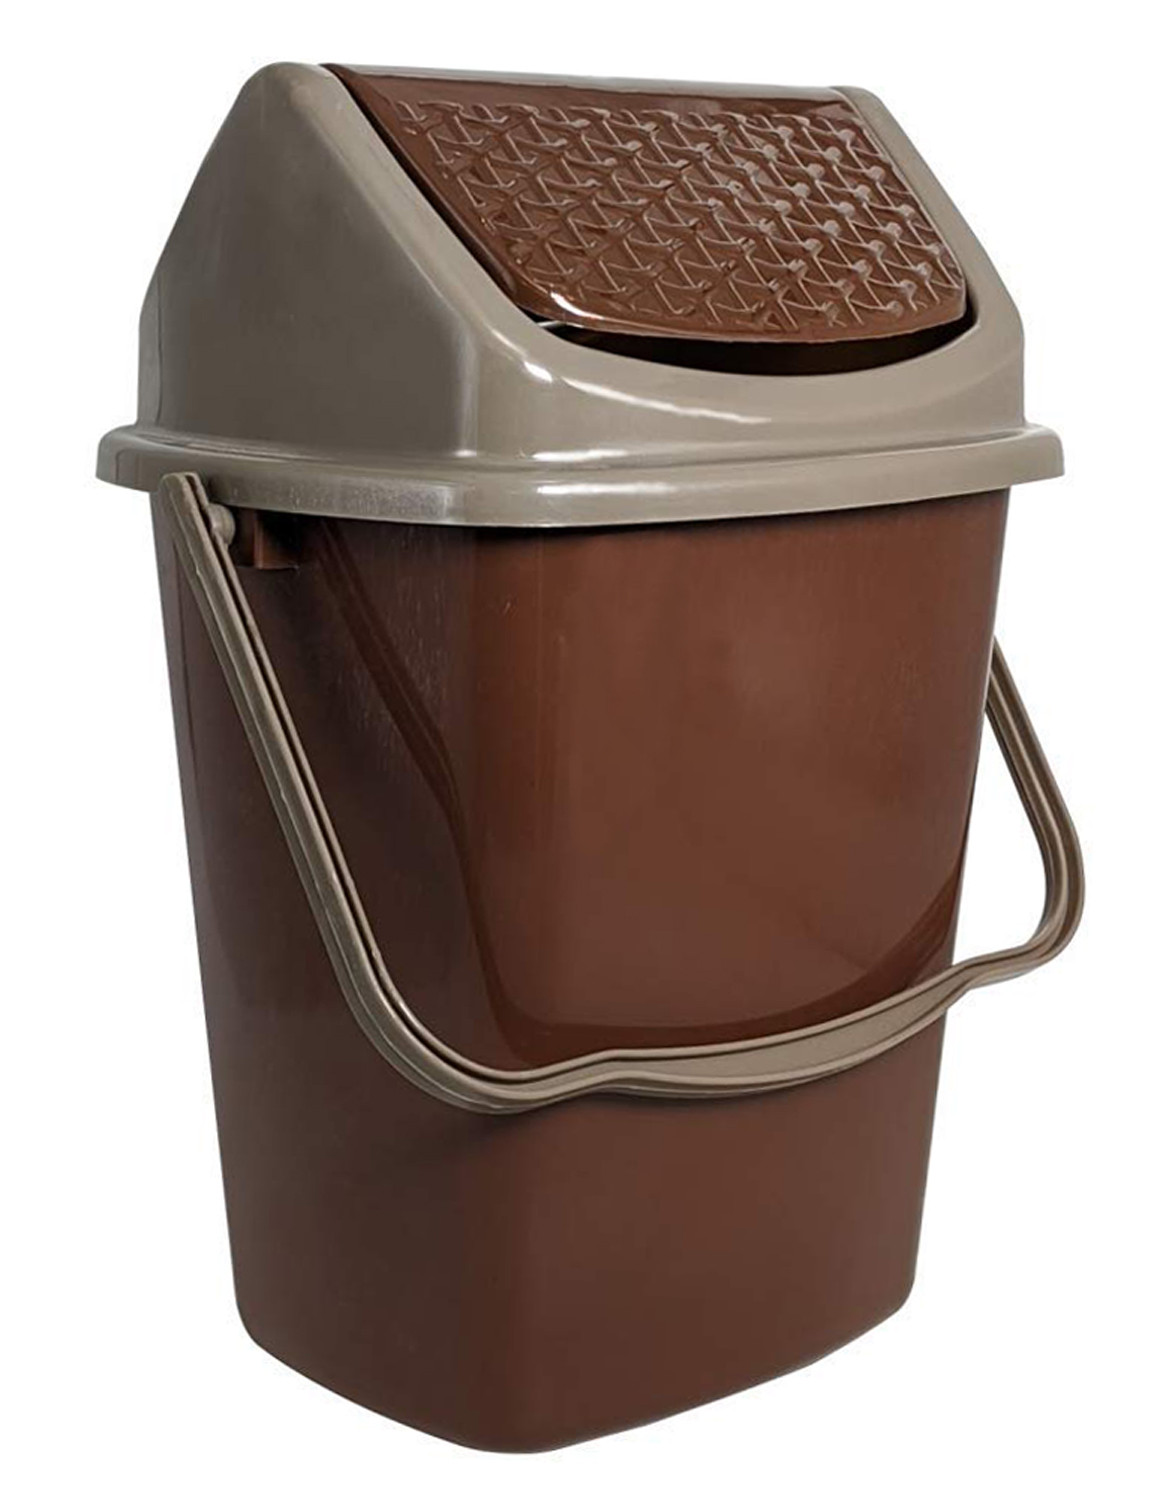 Kuber Industries Delight Plastic Swing  Garbage Waste Dustbin for Home, Office with Handle, 5 Liters (Brown)